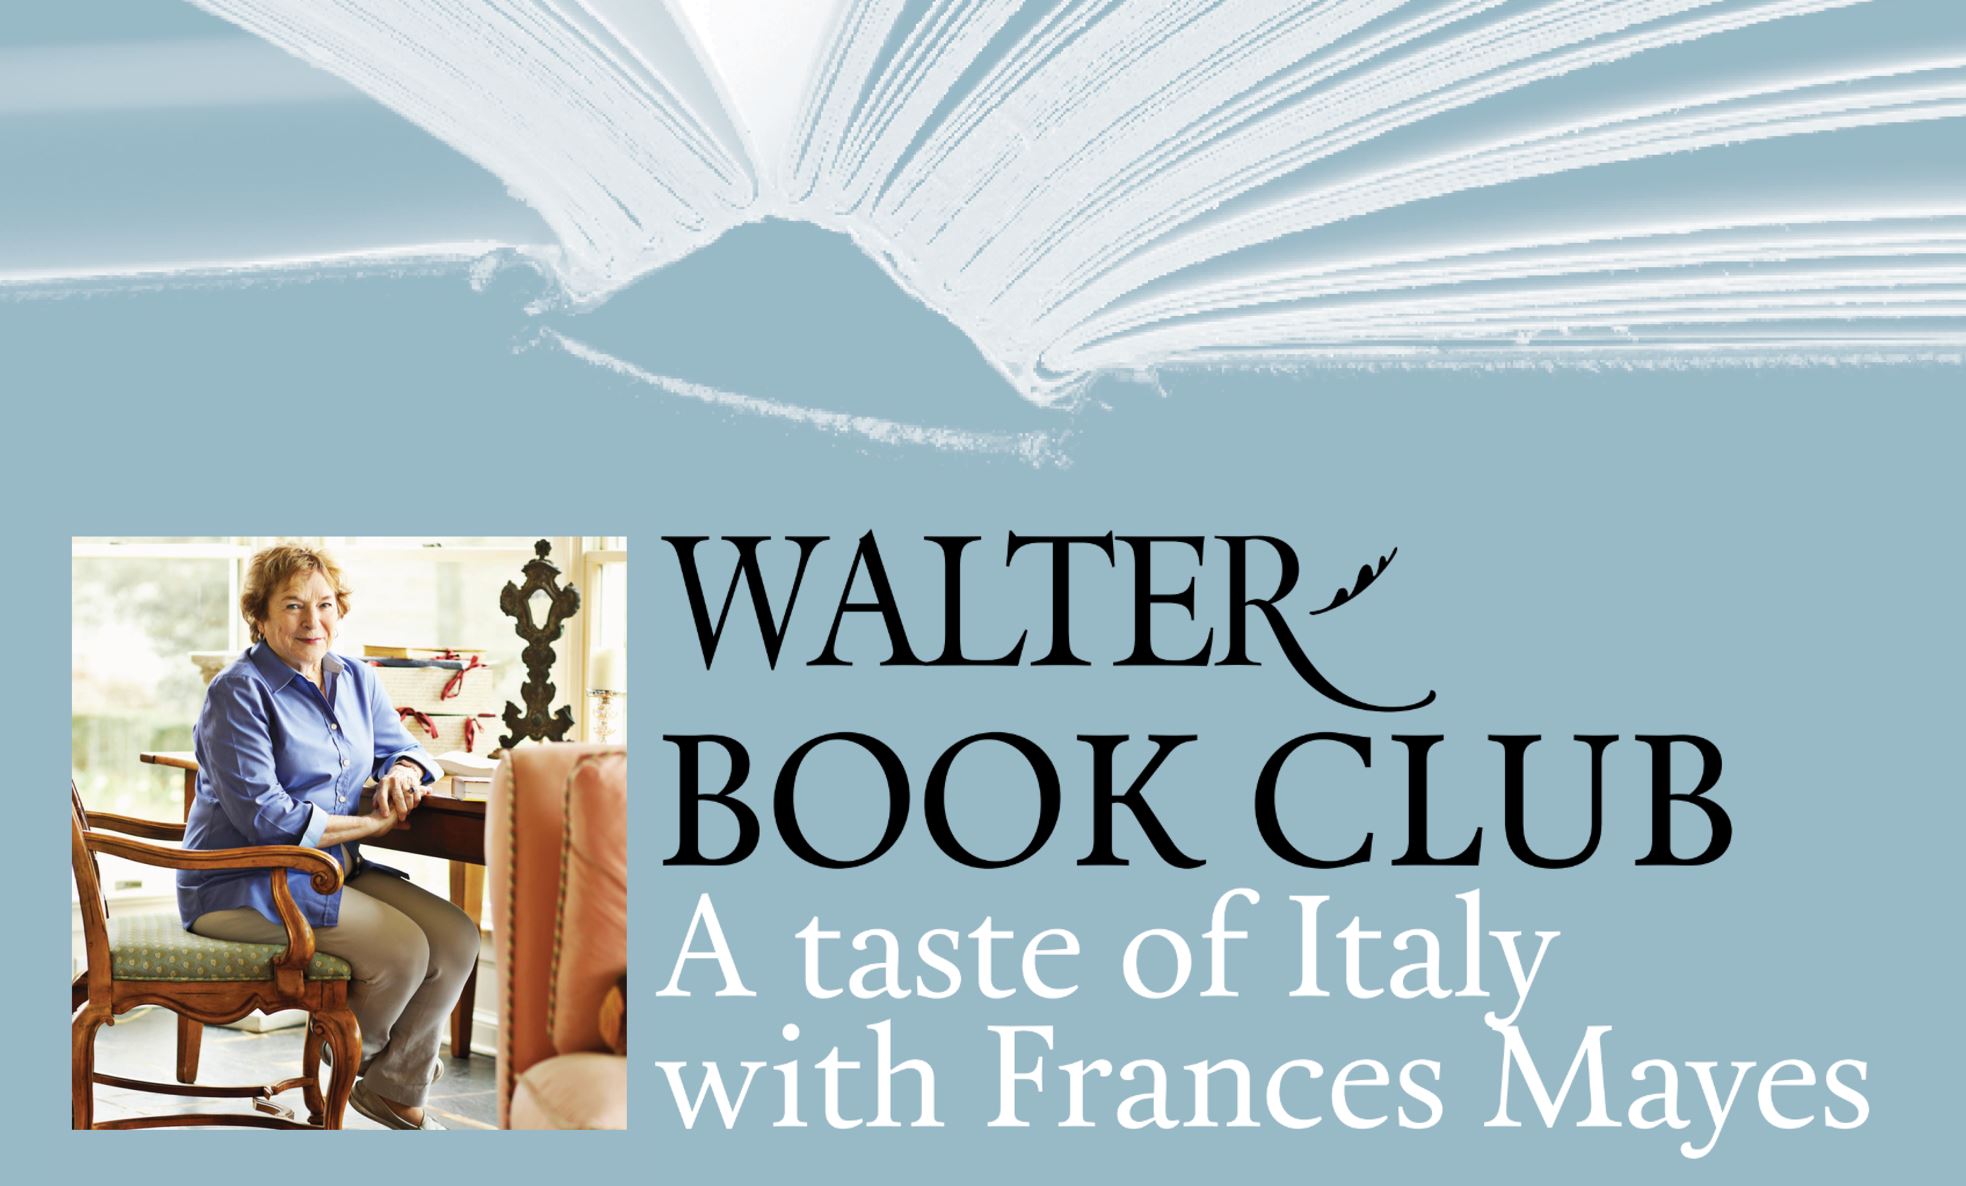 A Taste of Italy with Frances Mayes